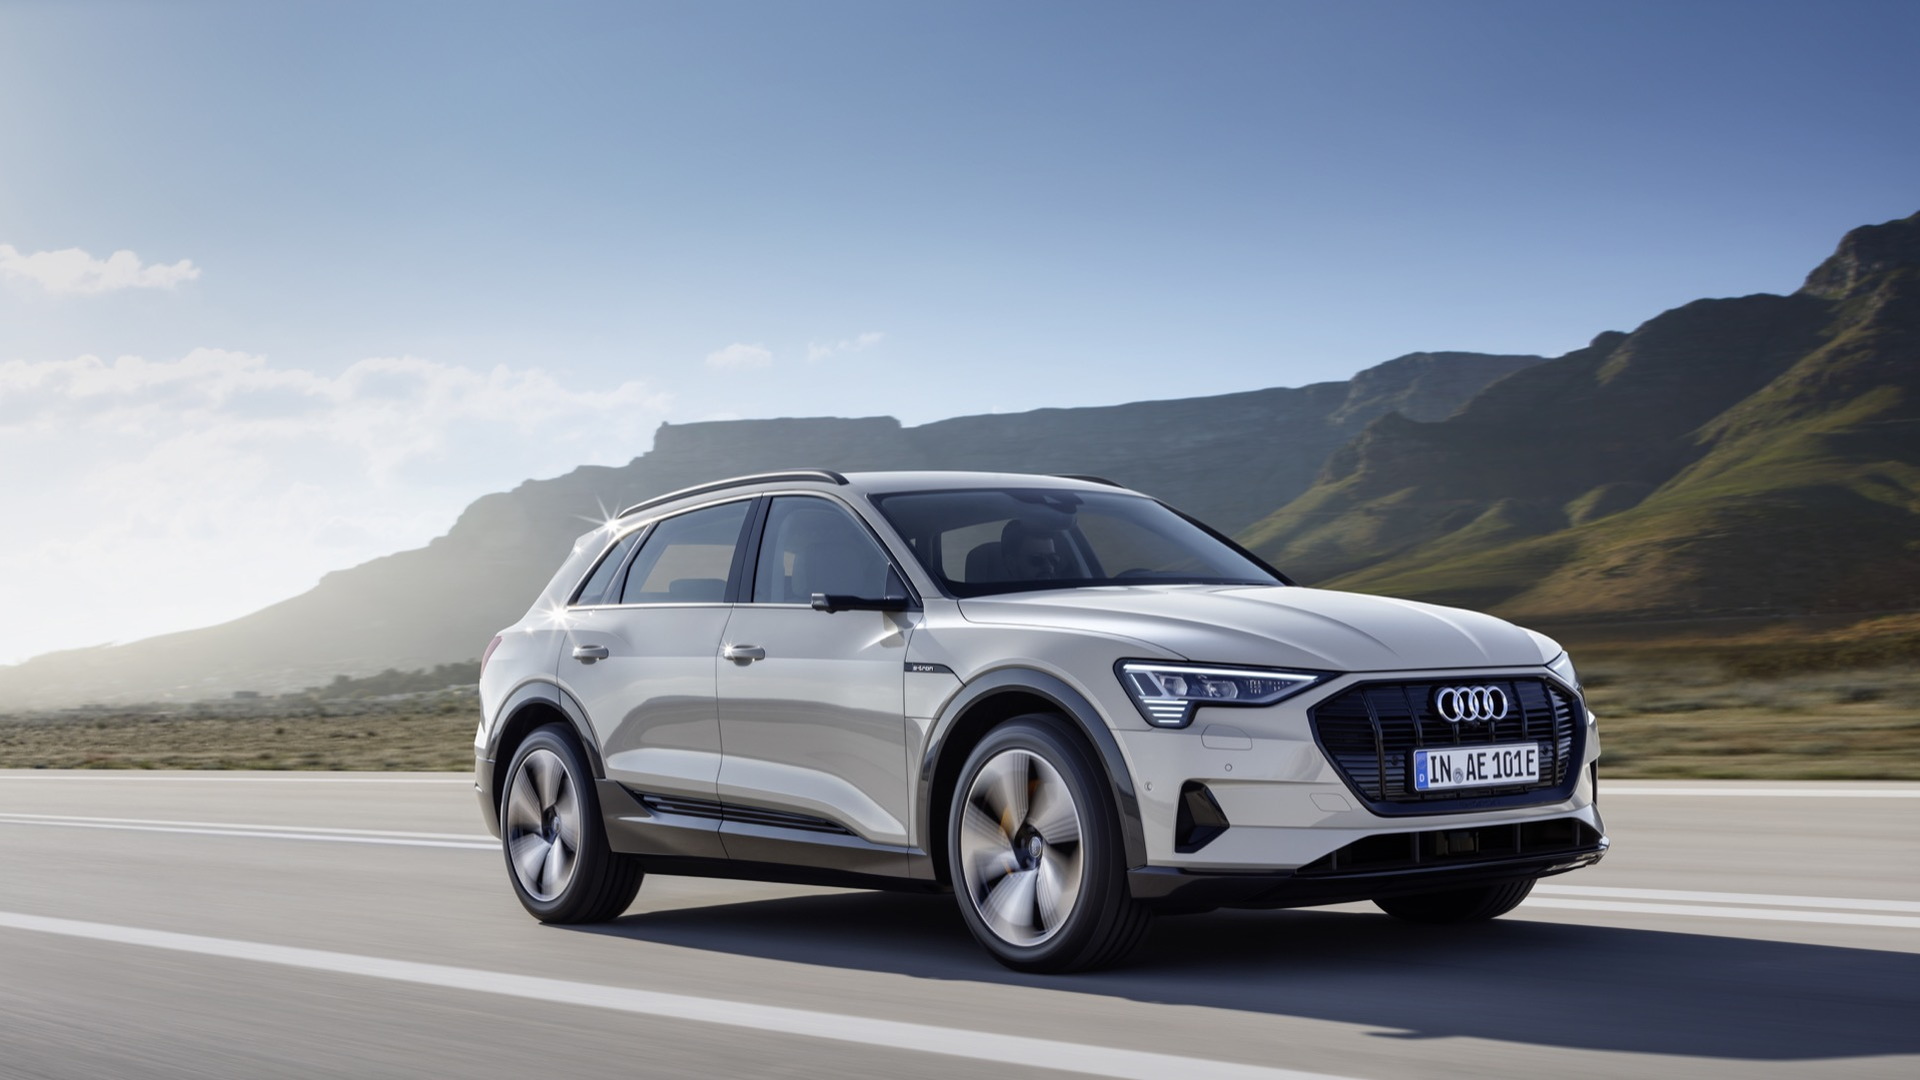 Gedwongen streep Pacifische eilanden 2019 Audi e-tron EPA range revealed: Nothing to brag about, but aiming for  the real world?